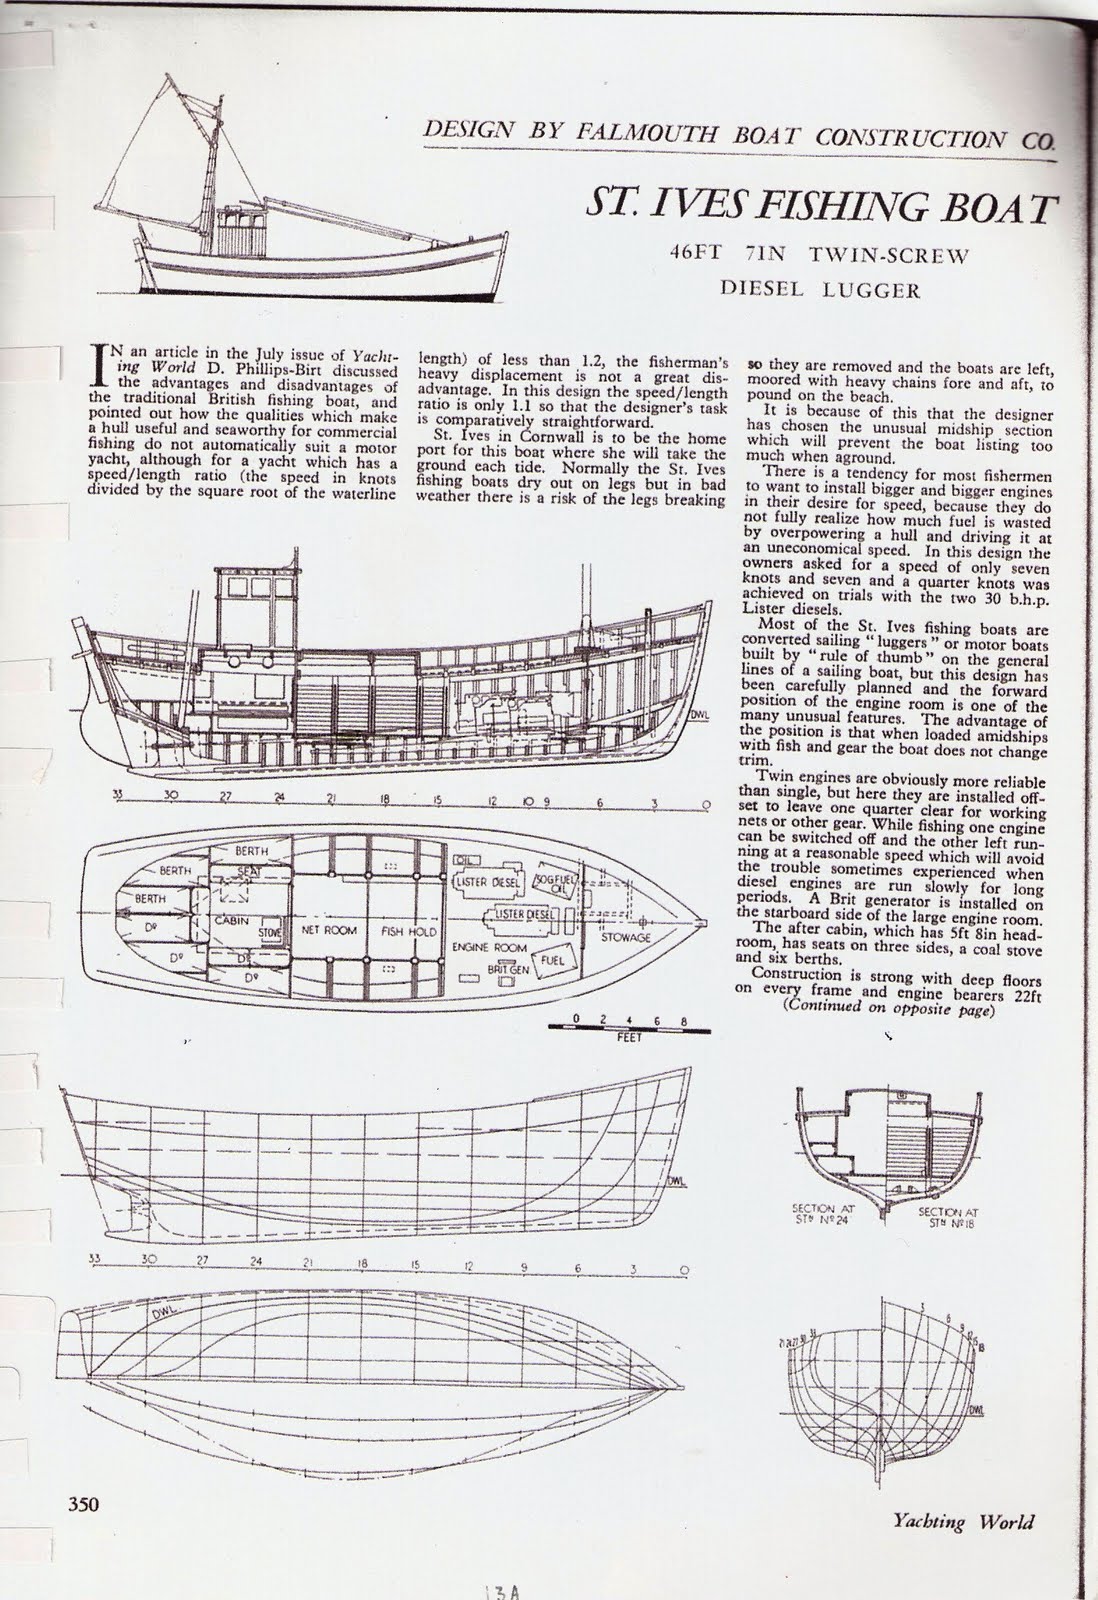  the magazine Yachting Monthly published line drawings of the boat